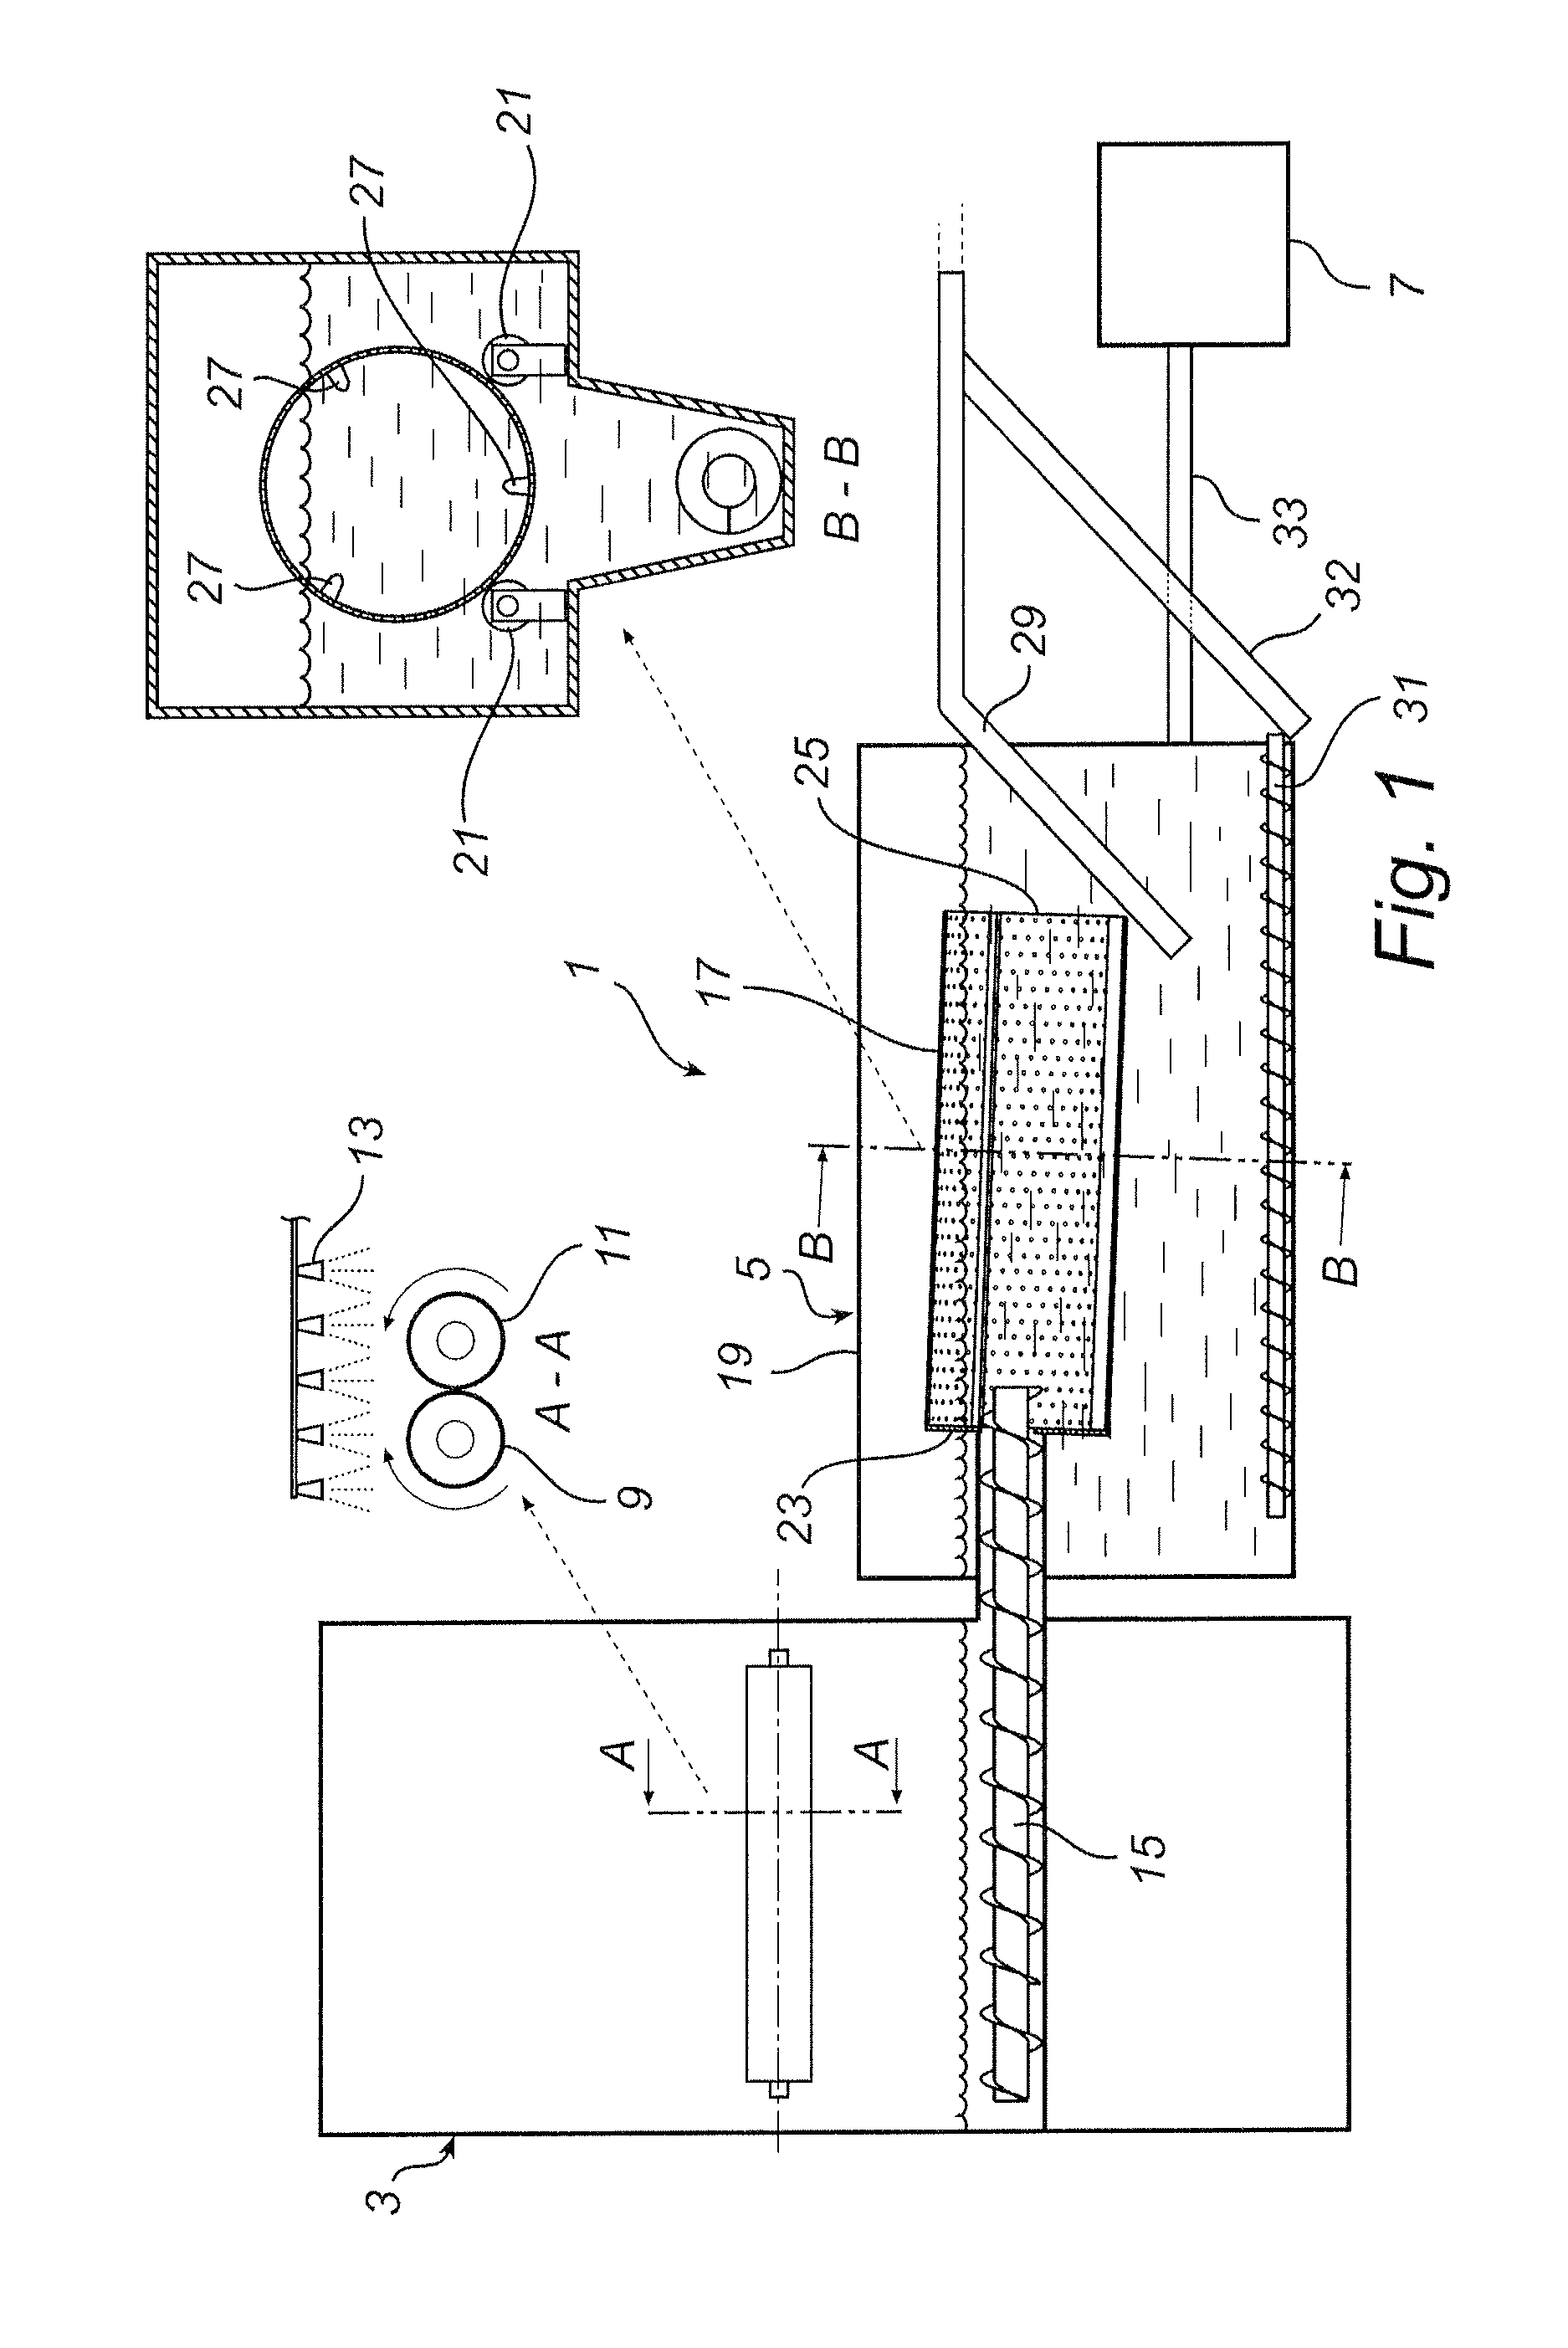 Method and Device for Separation of Recoverable Material from Products Containing Mercury